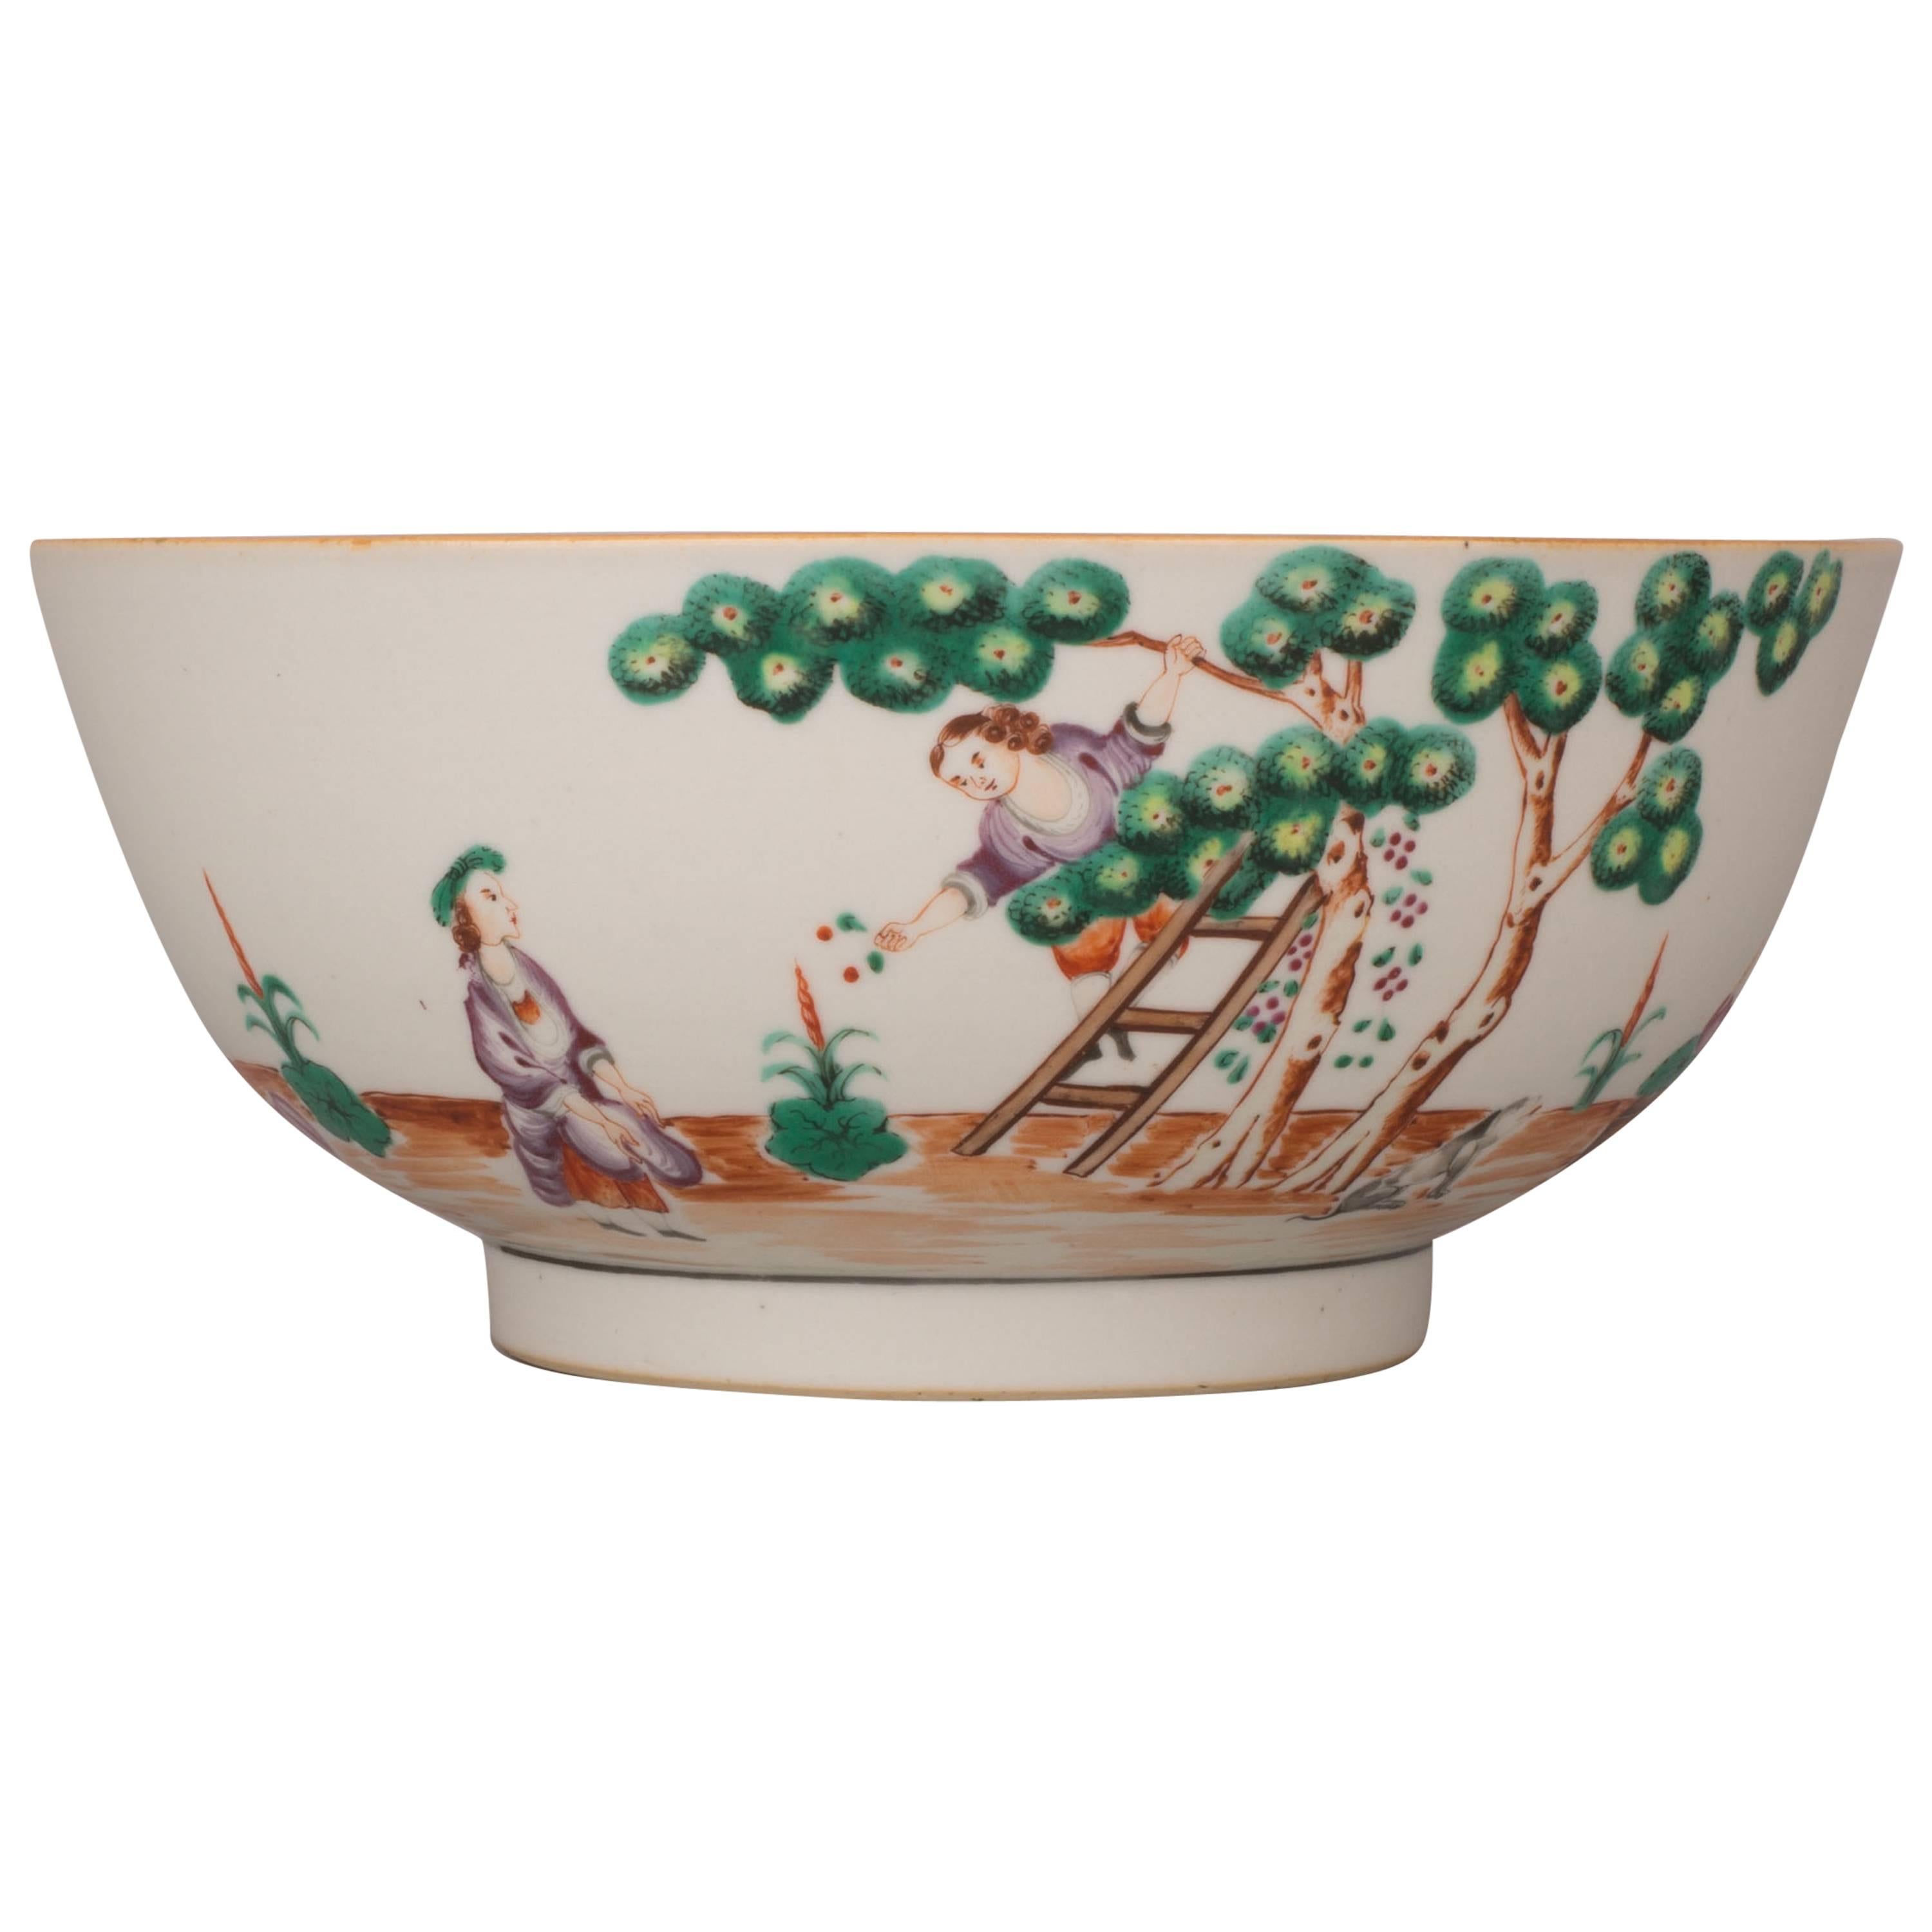 A Chinese export porcelain famille rose deep bowl, ‘Cherry Pickers’, 18th century